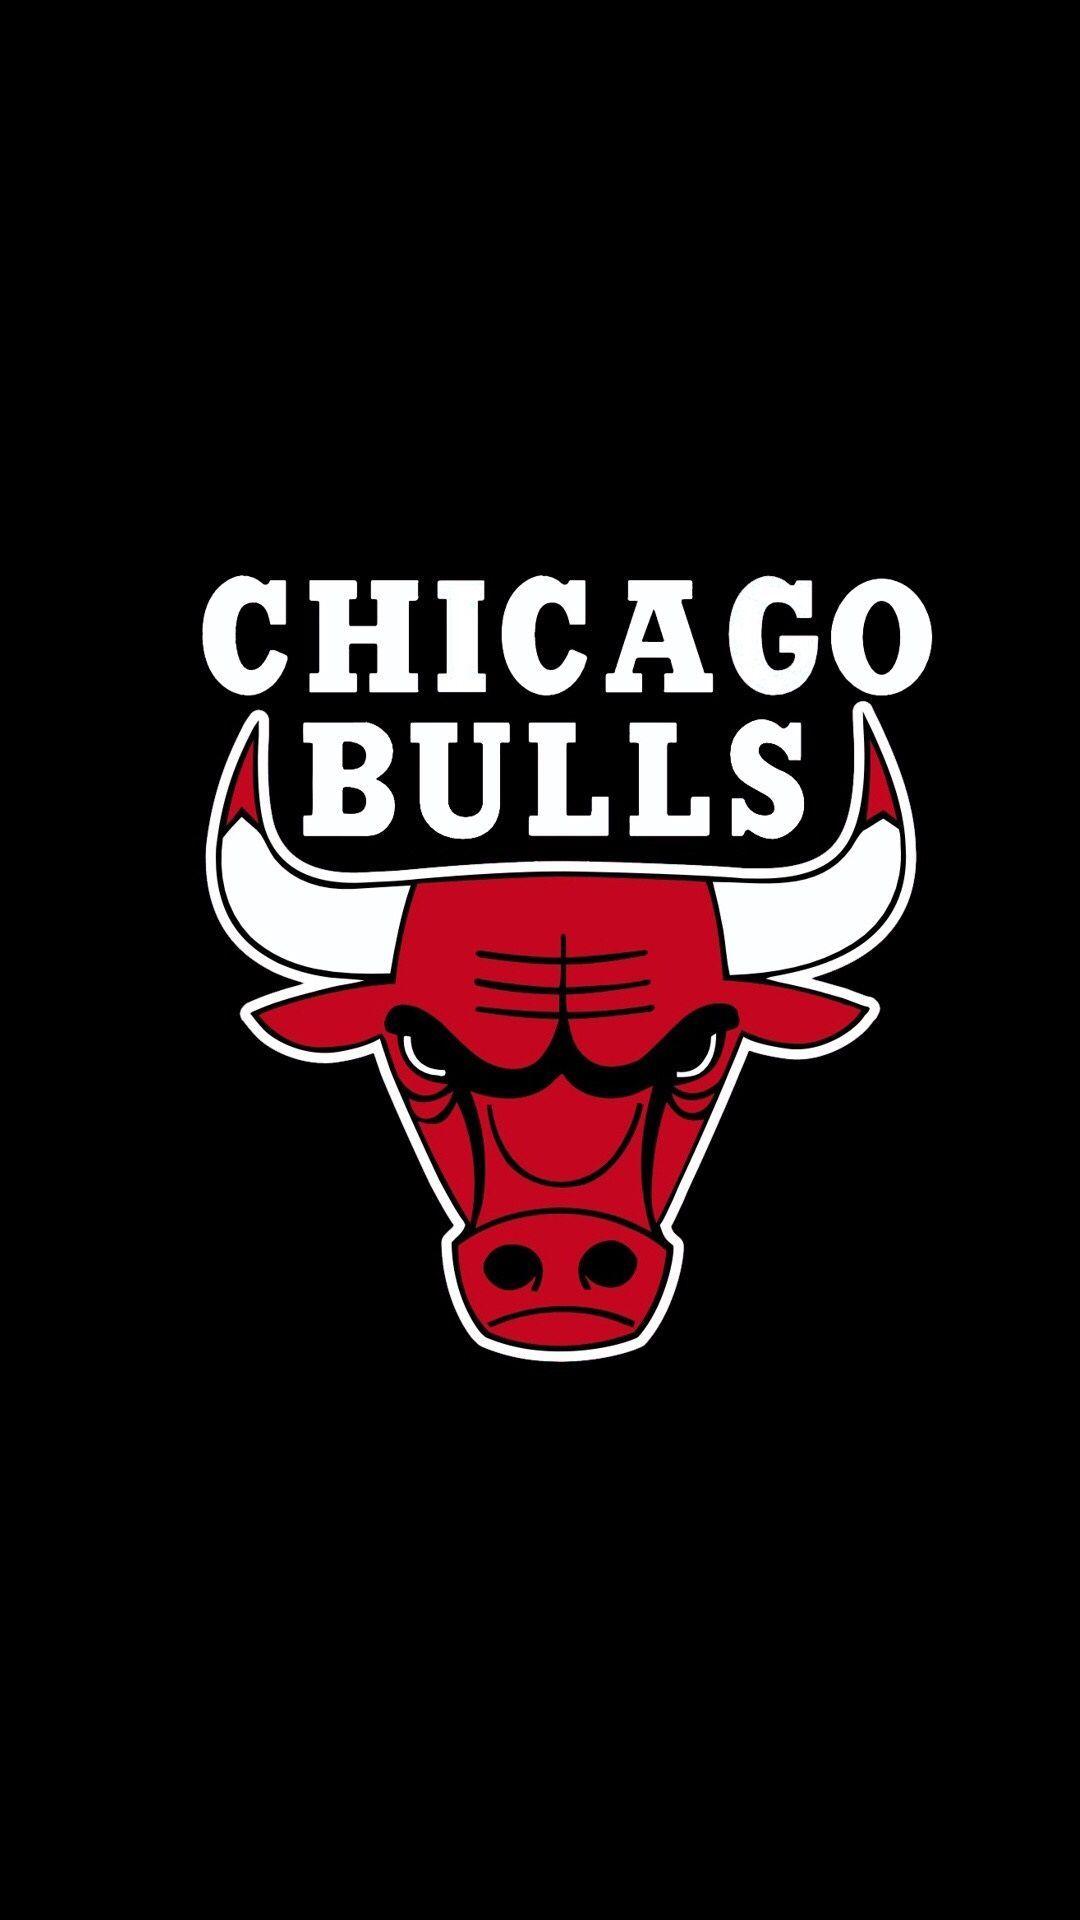 Dope Bulls Logo - Pin by Law Of Attraction on 90s Bulls Dynasty 91,92,93 /96,97,98 ...